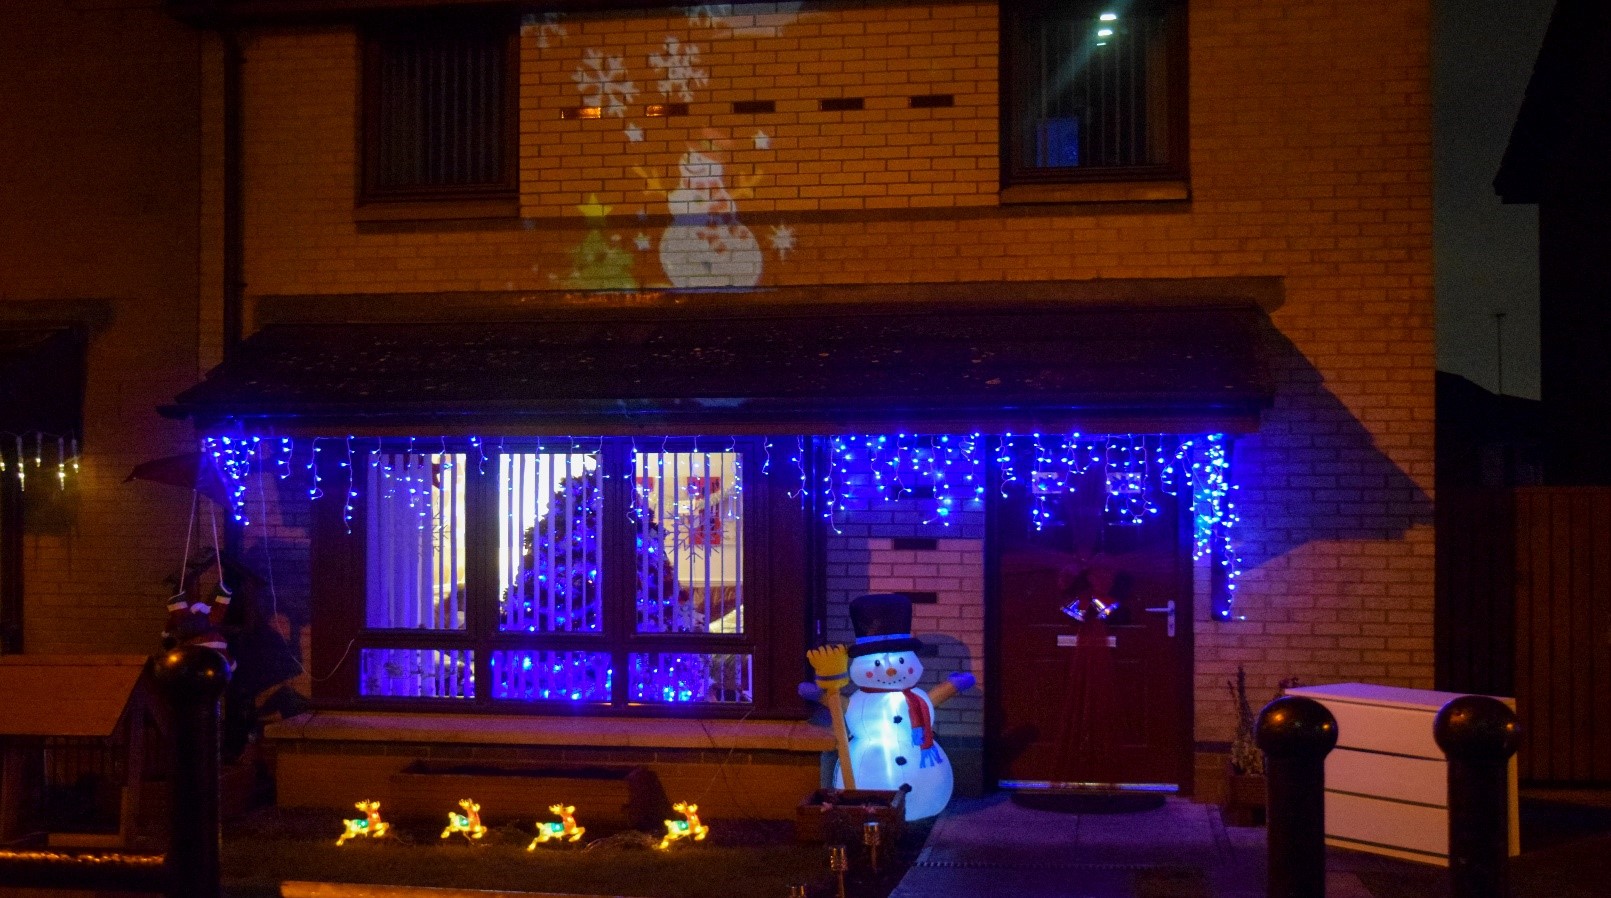 Wellhouse Christmas lights competition winners announced